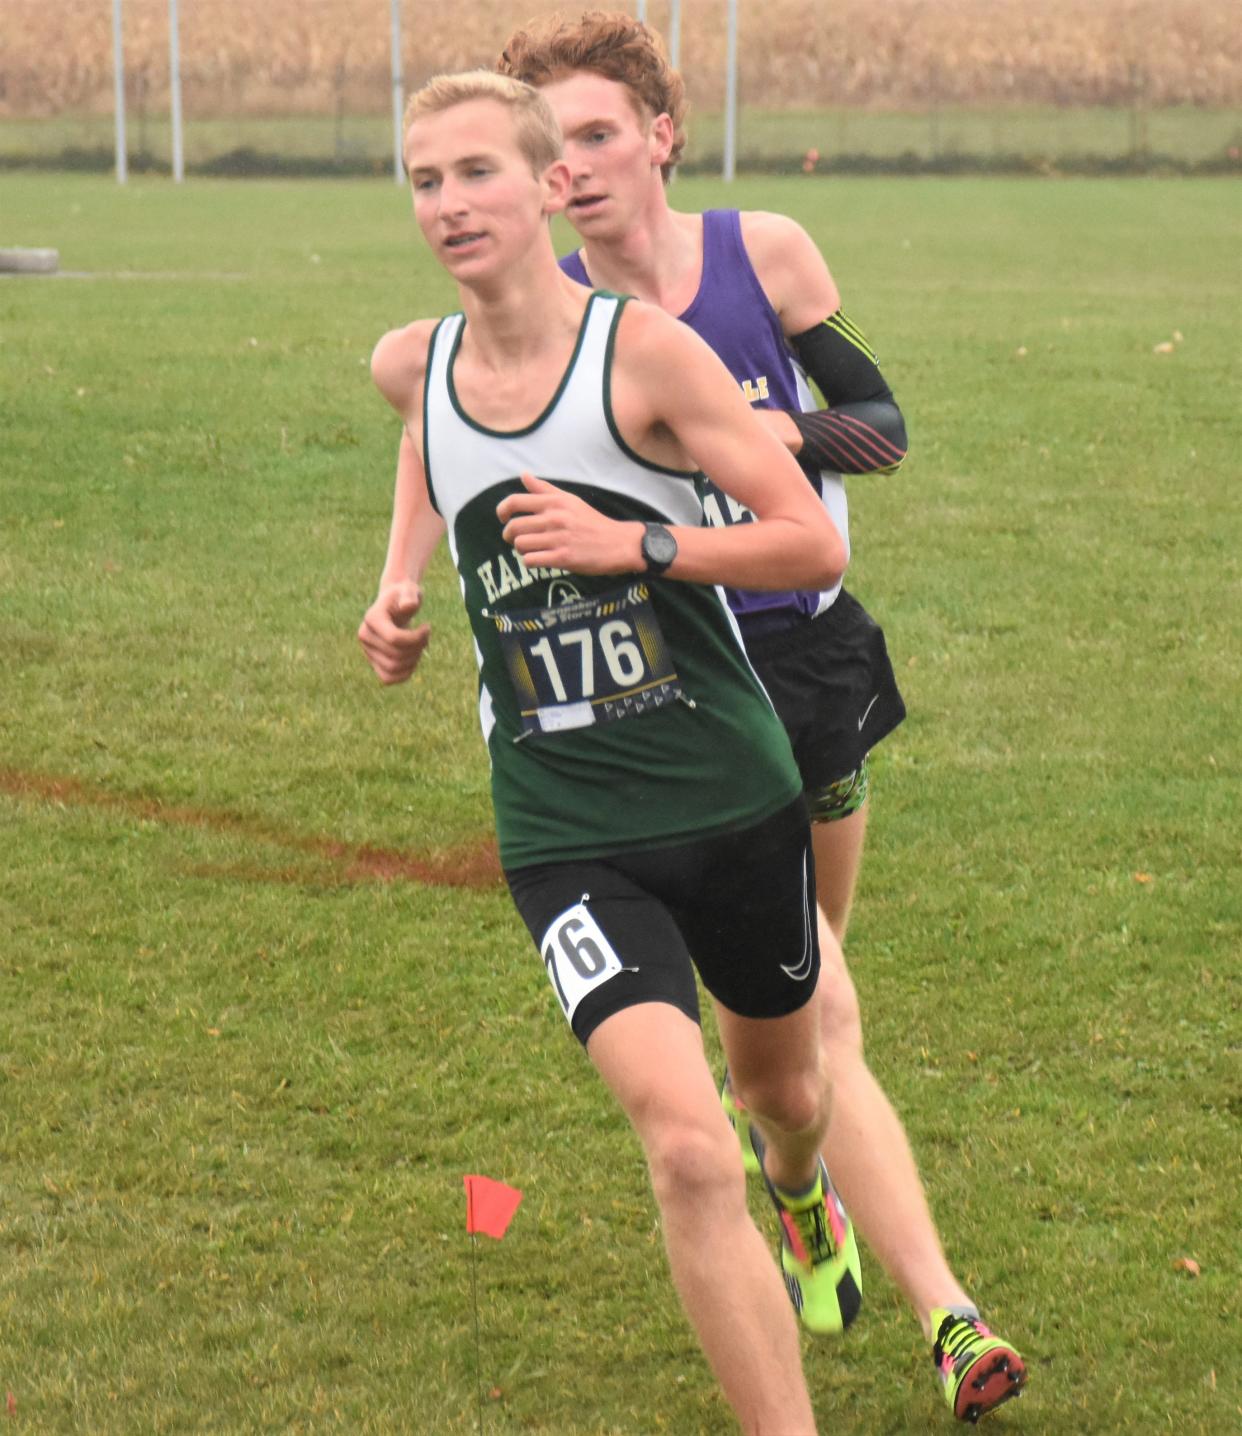 Hamilton's Joseph Berry (176) leads Waterville's Logan Baker around a turn on the Mt. Markham course at the 2023 Center State Conference championship meet. Berry ran 14th and Baker 27th Saturday in the Class D race at the state meet.